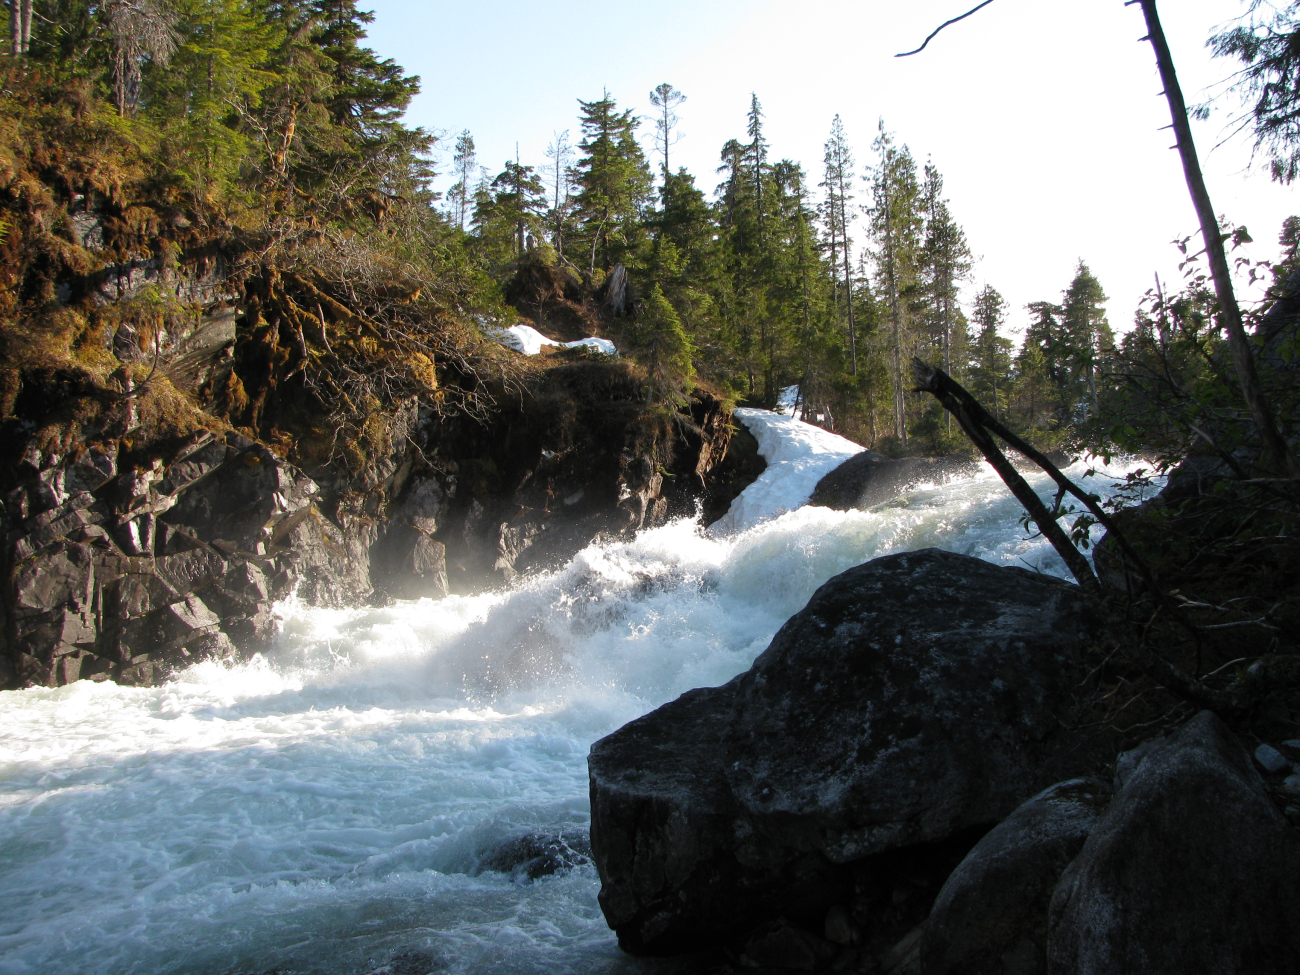 Baranof River waterfalls as they enter Warm Springs Bay